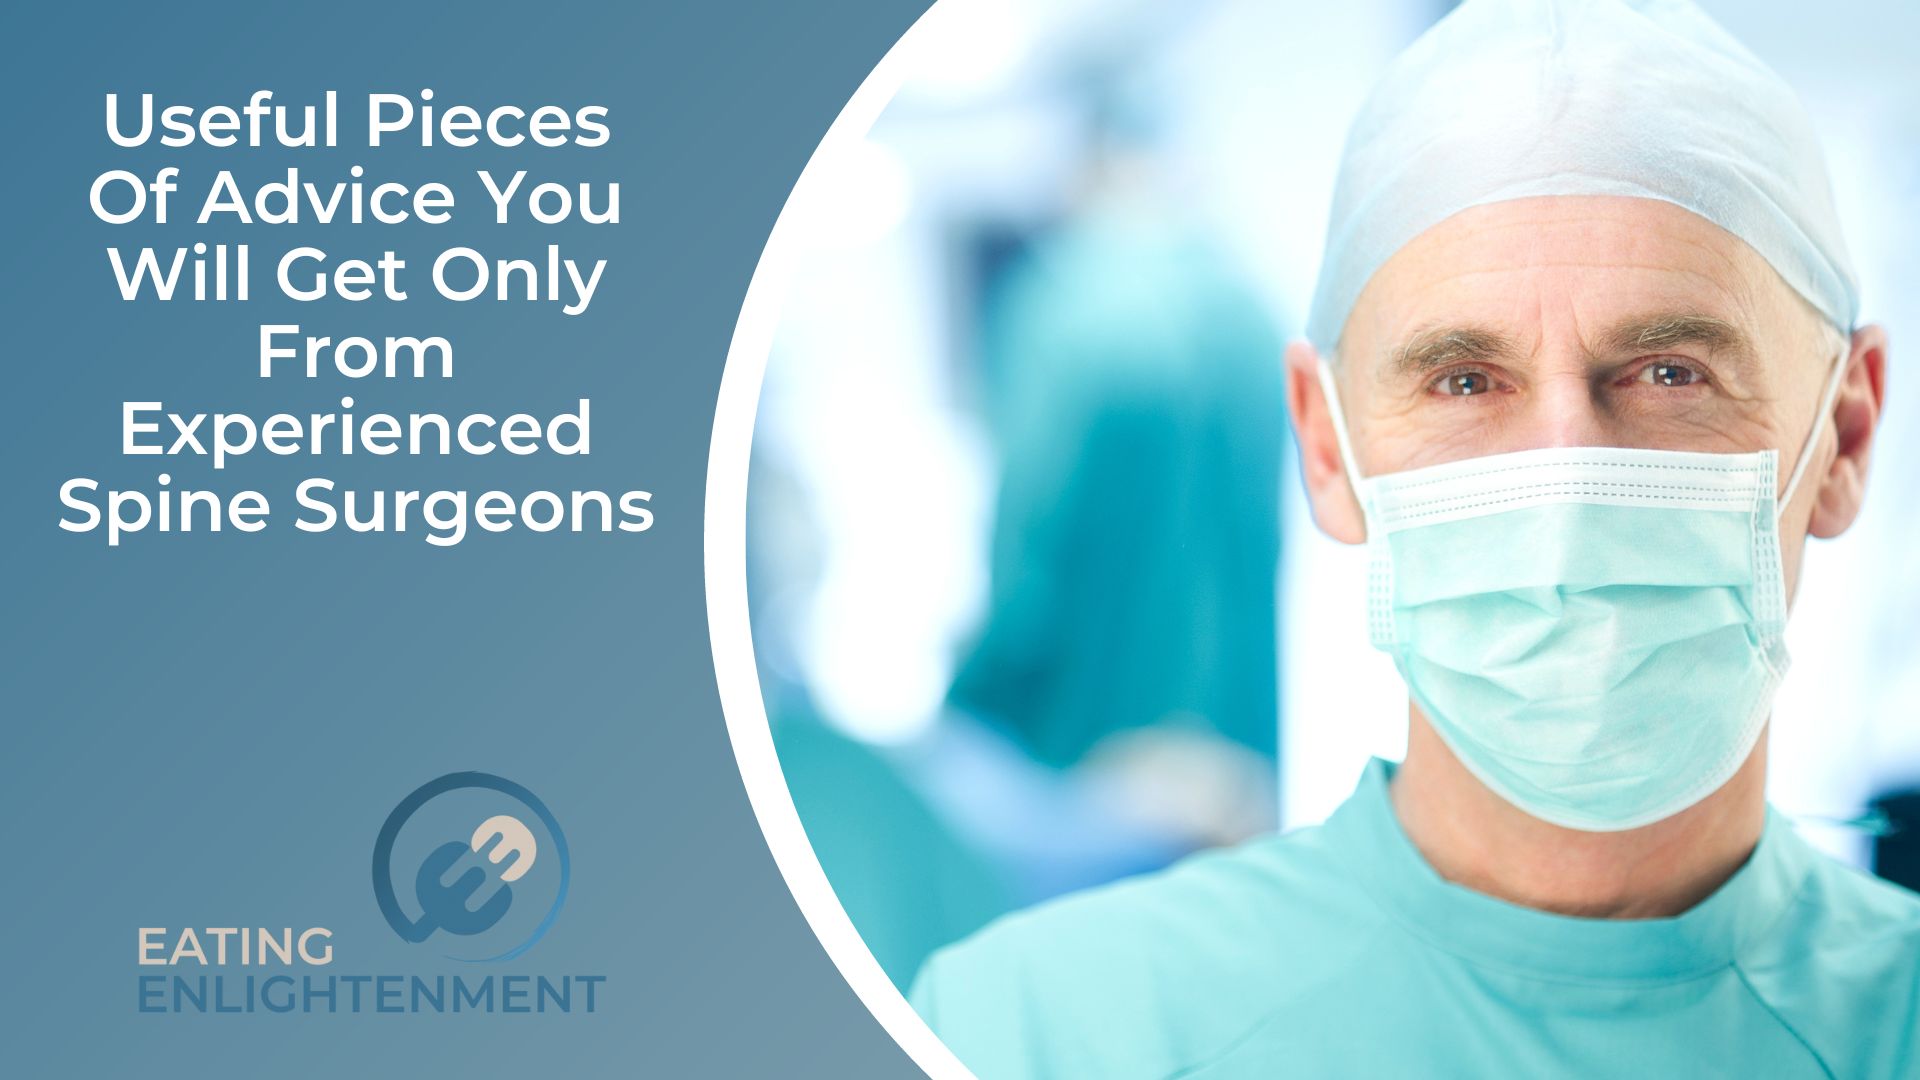 Useful Pieces Of Advice You Will Get Only From Experienced Spine Surgeons